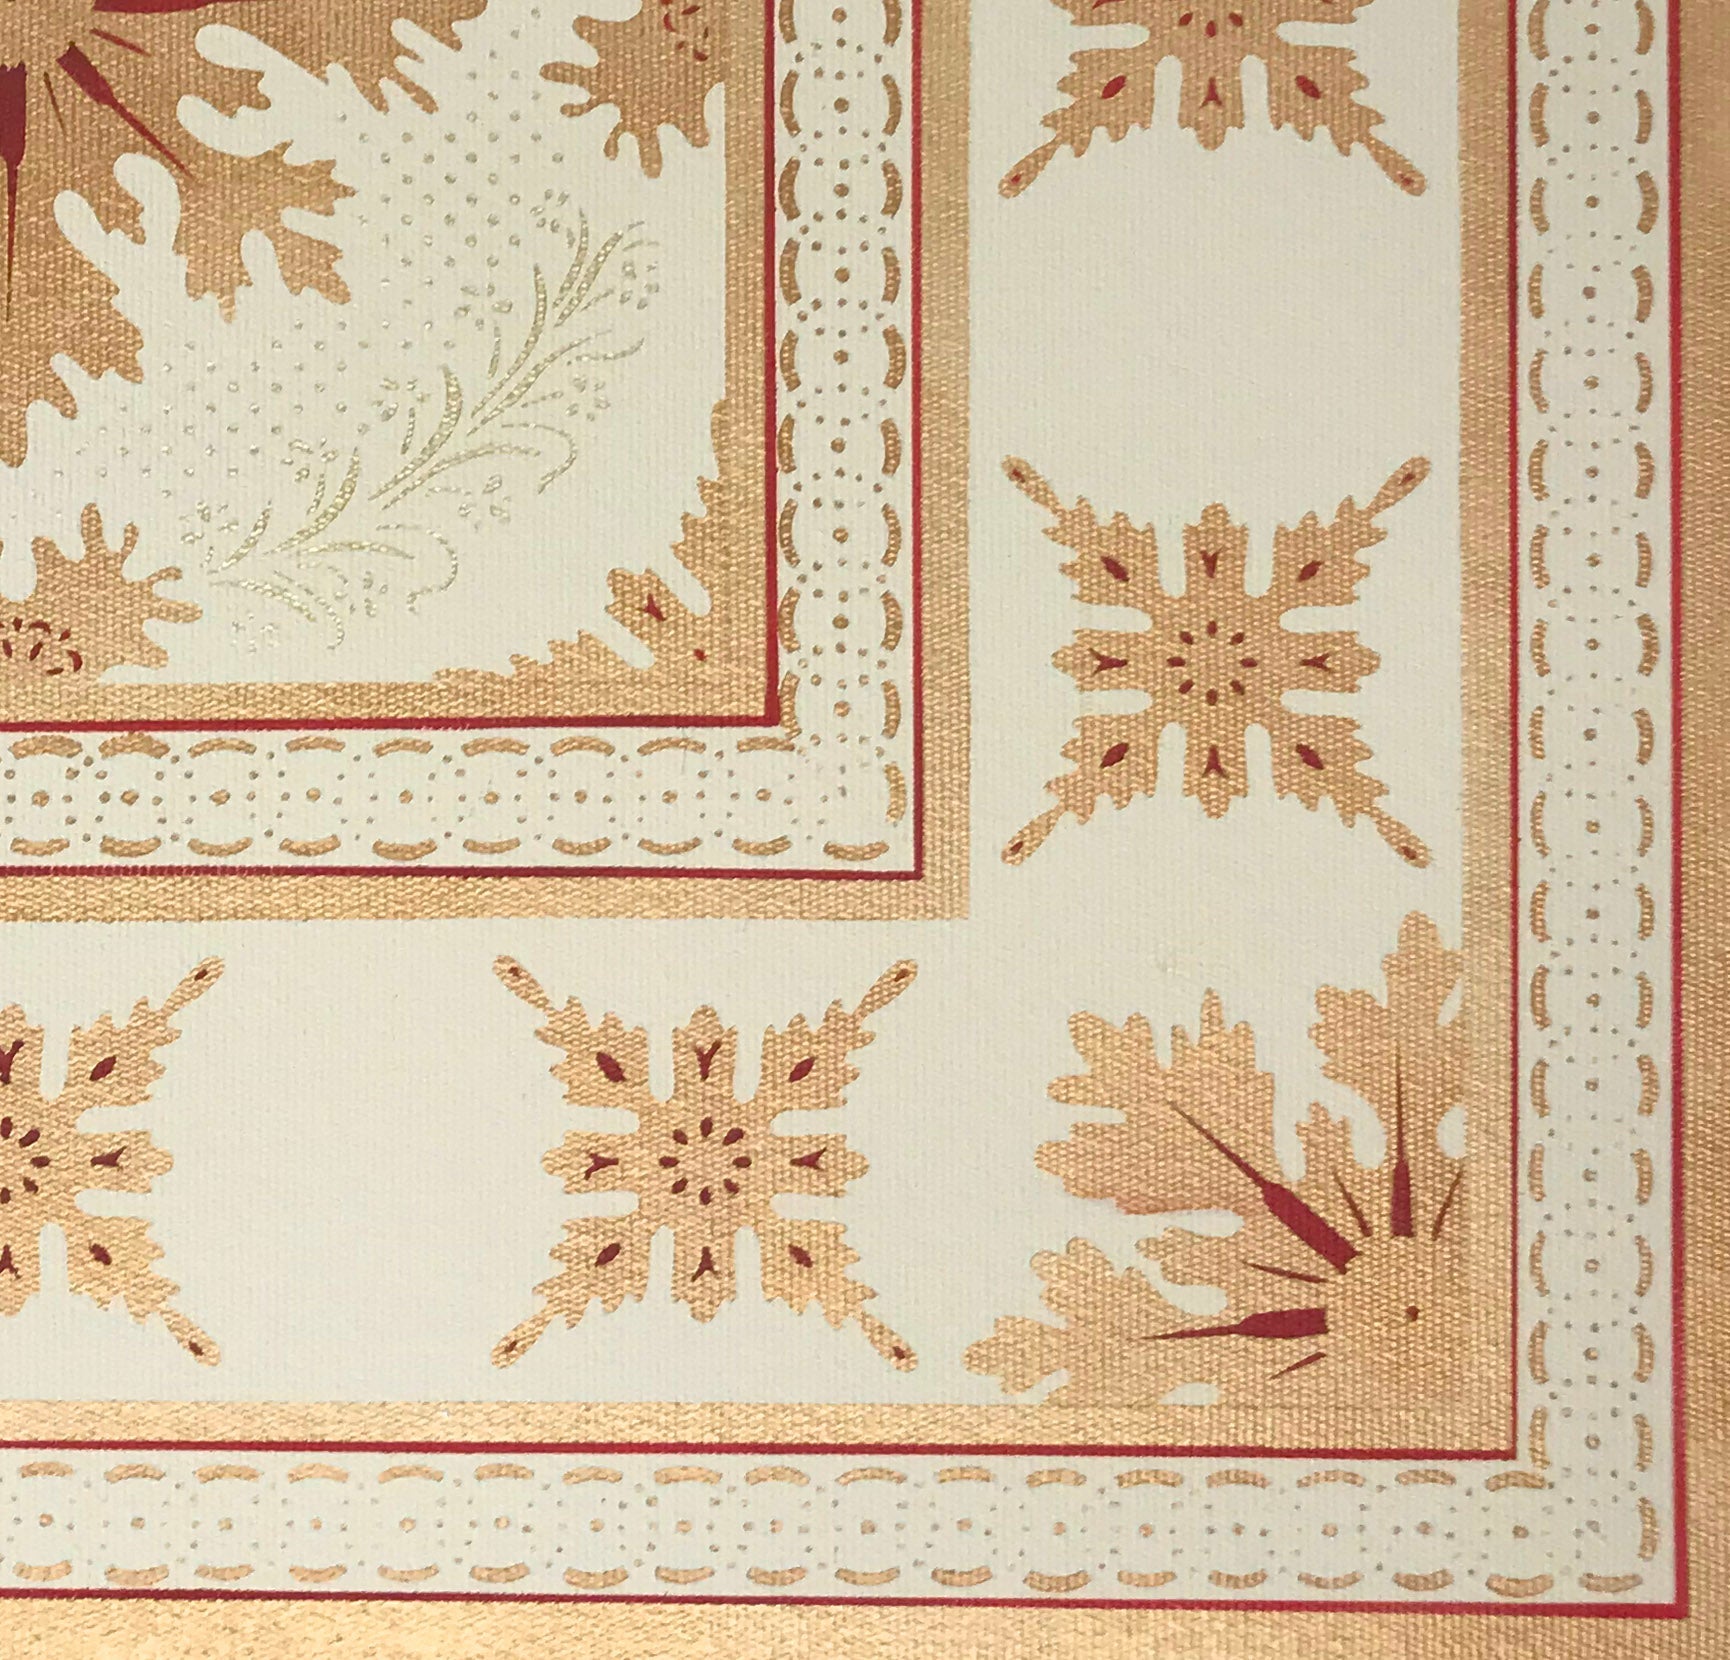 Close up of the corner of this floorcloth showing the border which is a combination of elements from the interior motifs, lines, and a complimentary circle and dot pattern.